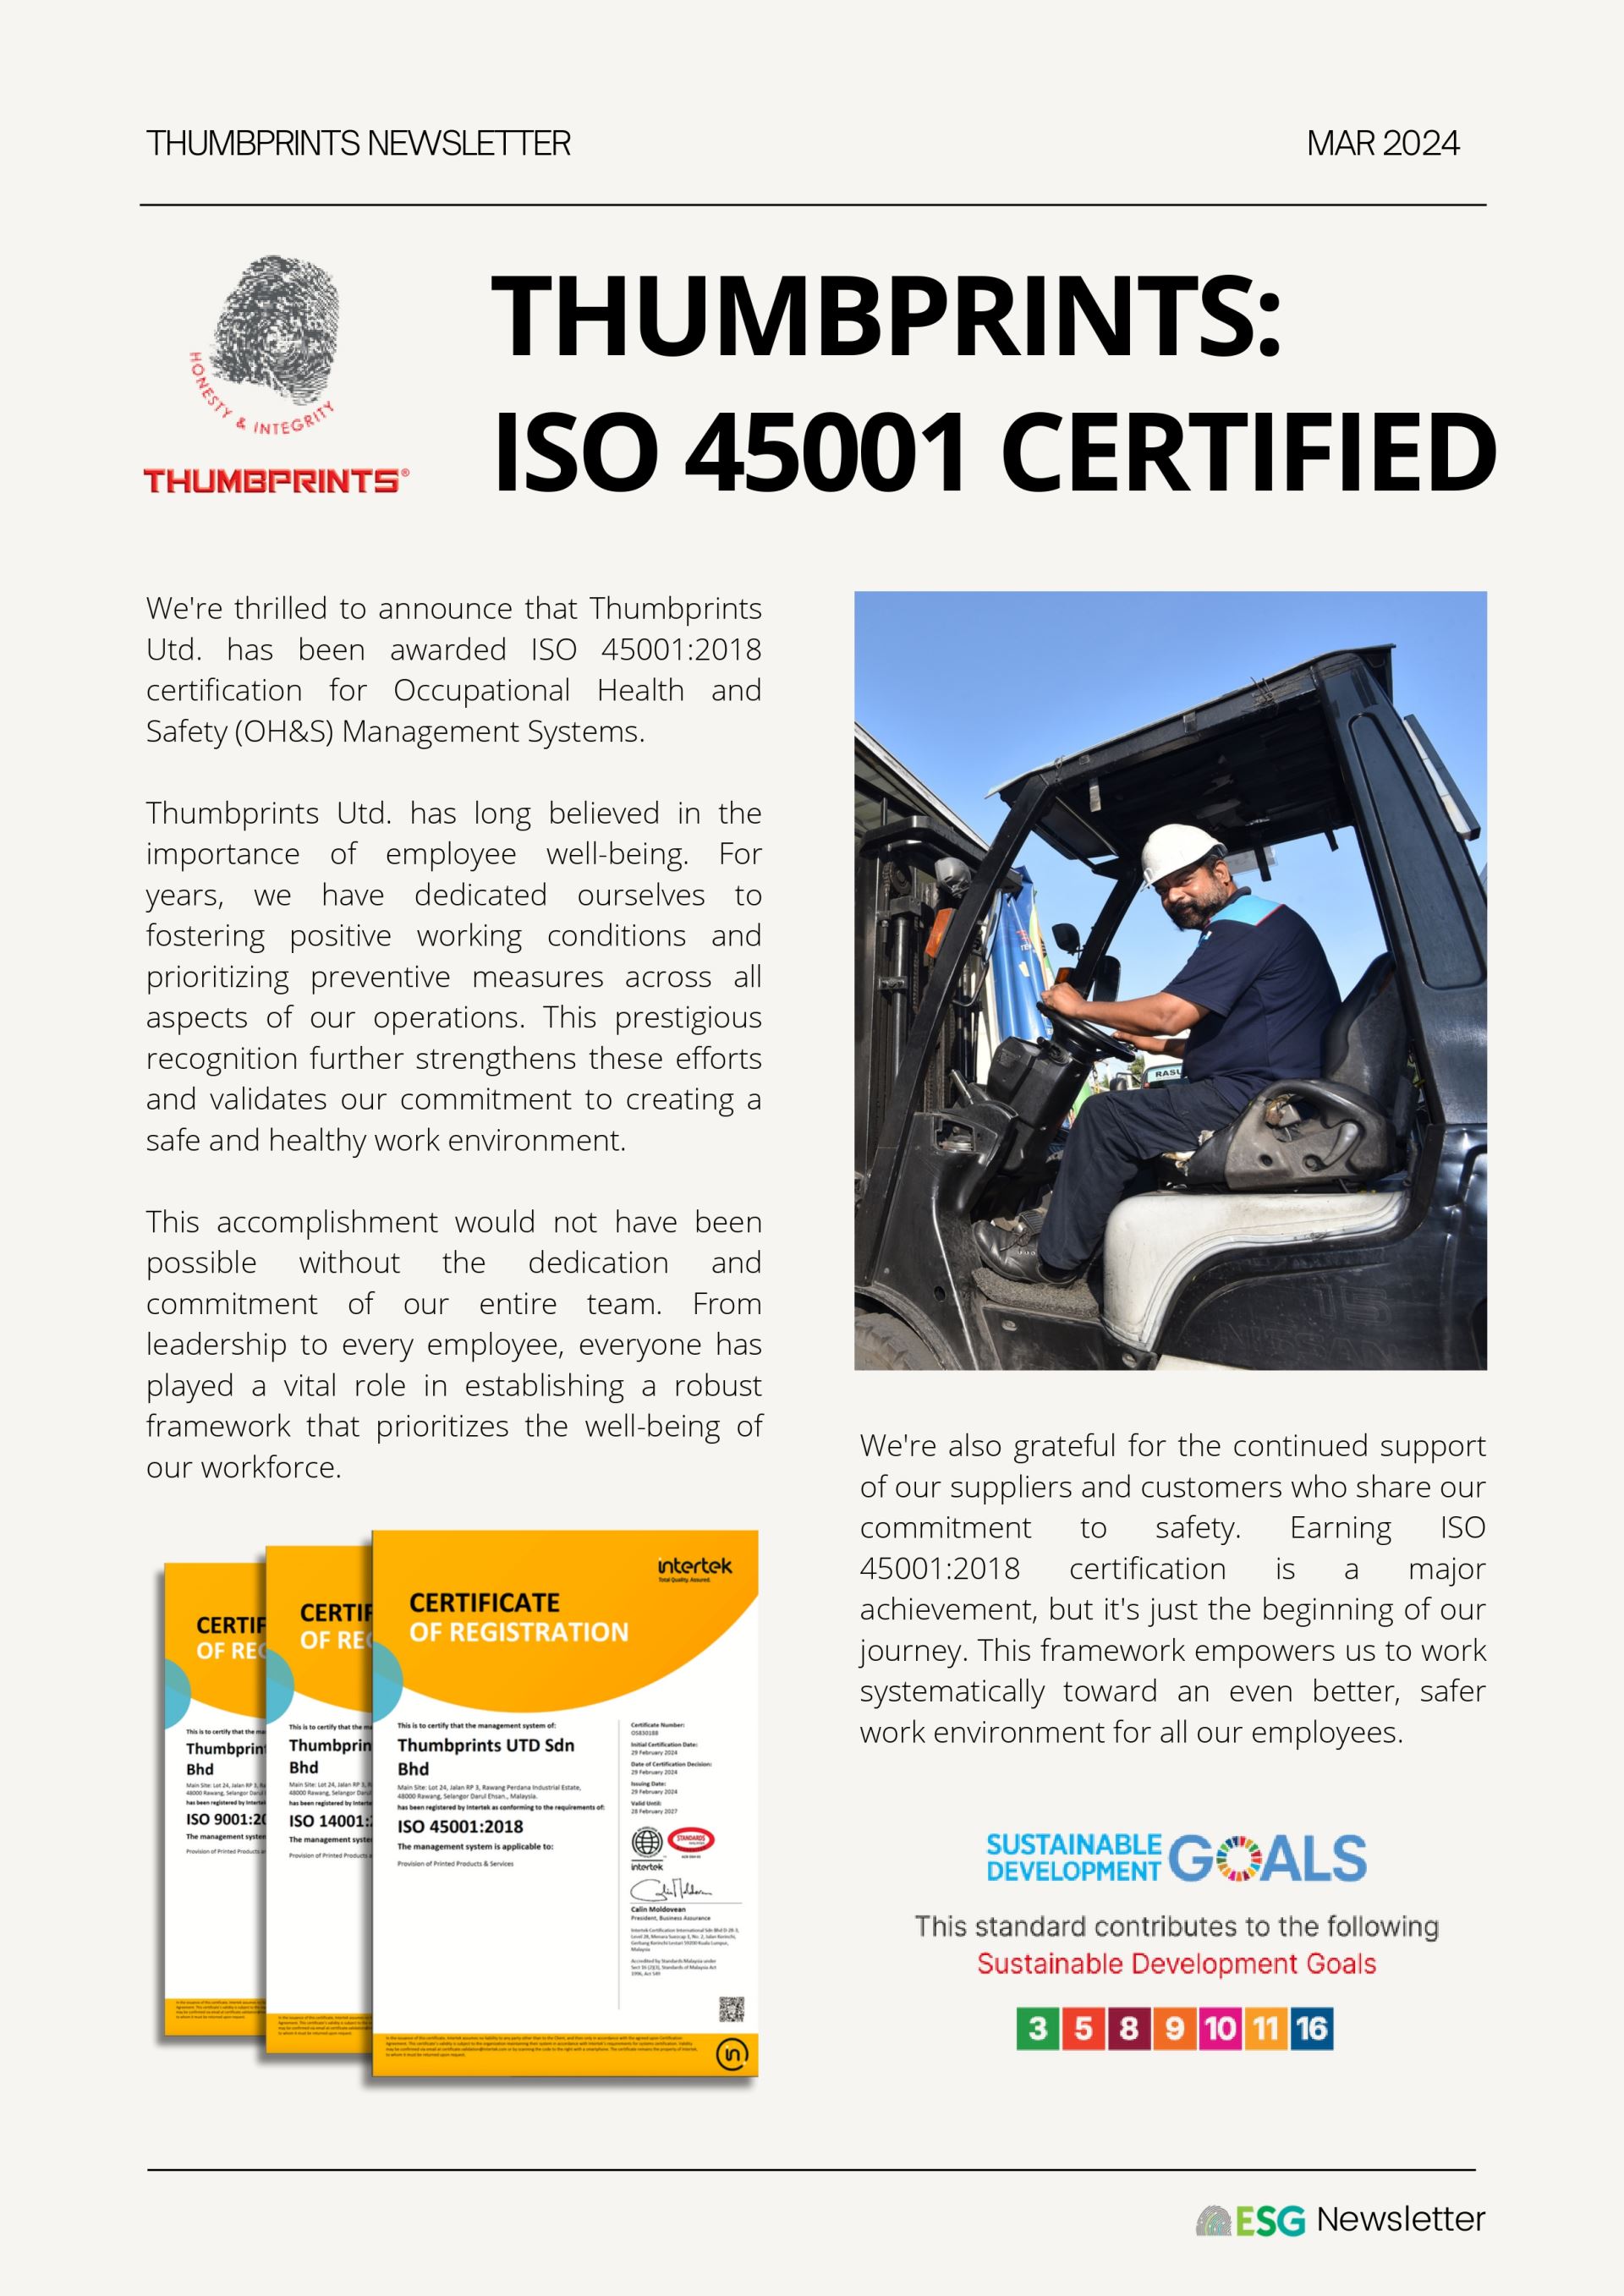 Thumbprints: ISO 45001 Certified